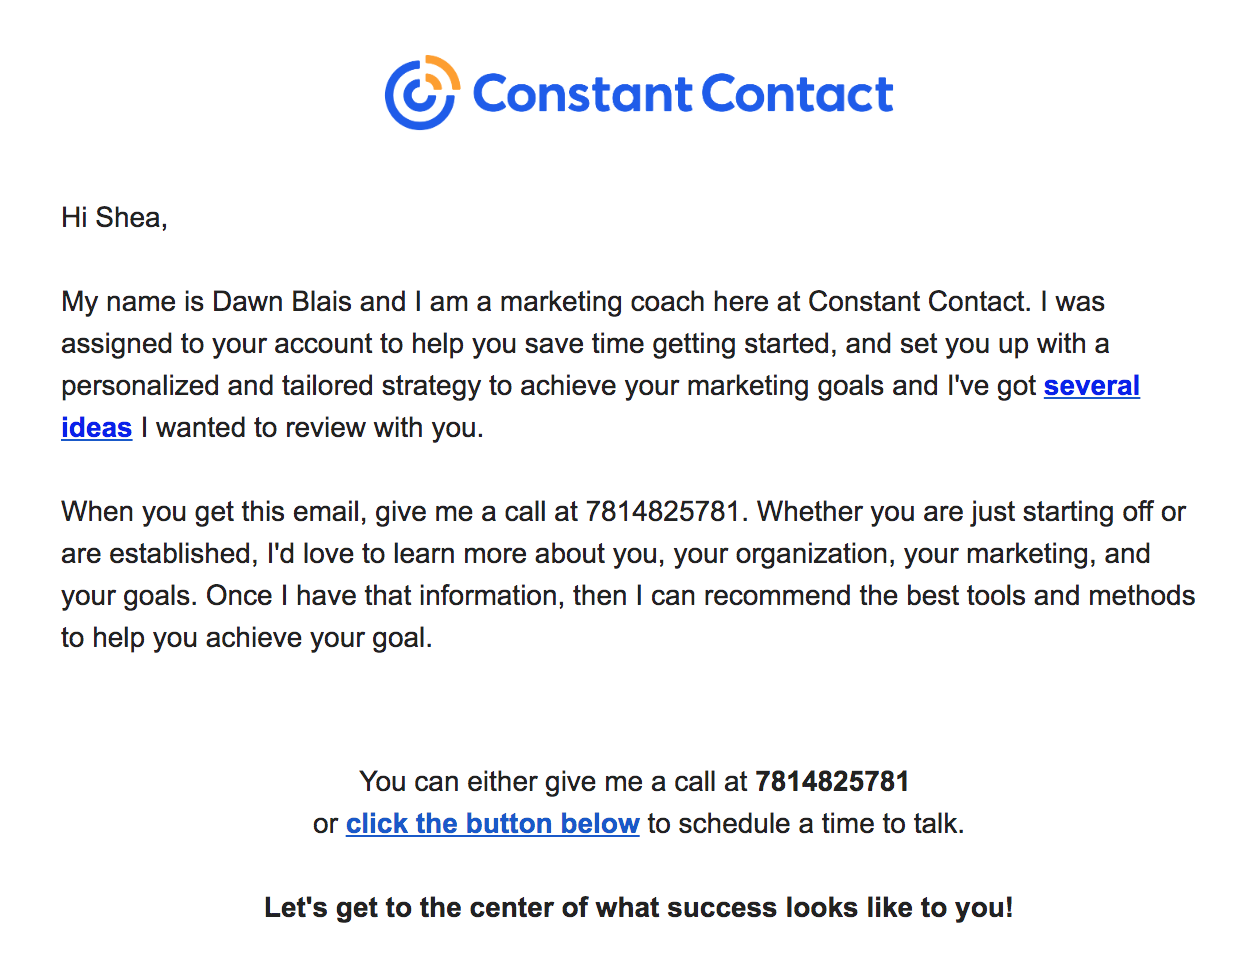 Screenshot of Constant Contact customer service representative reaching out via email to offer help